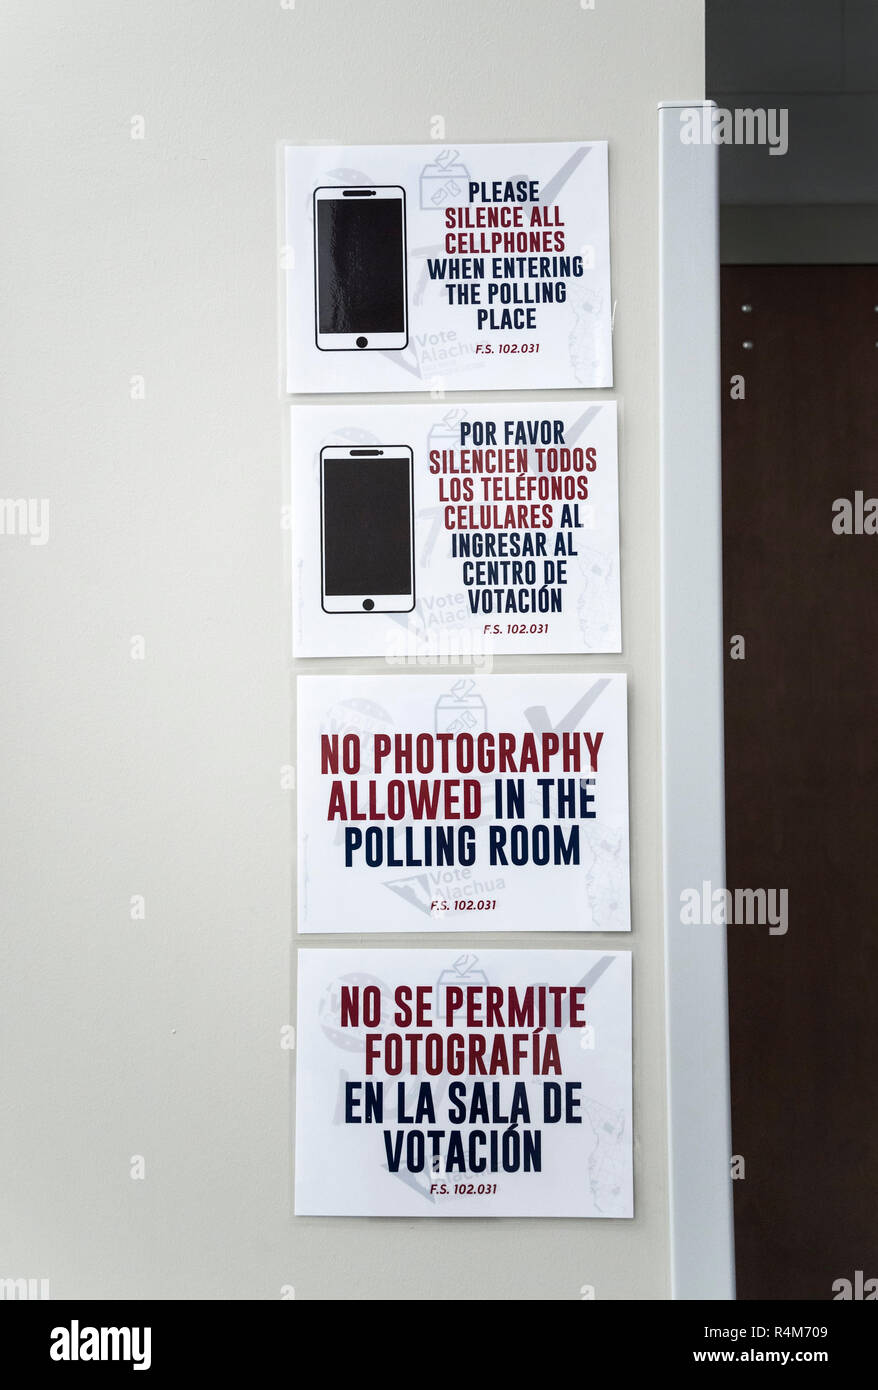 No Photography sign in both English and Spanish at public voting facility in Florida. Stock Photo